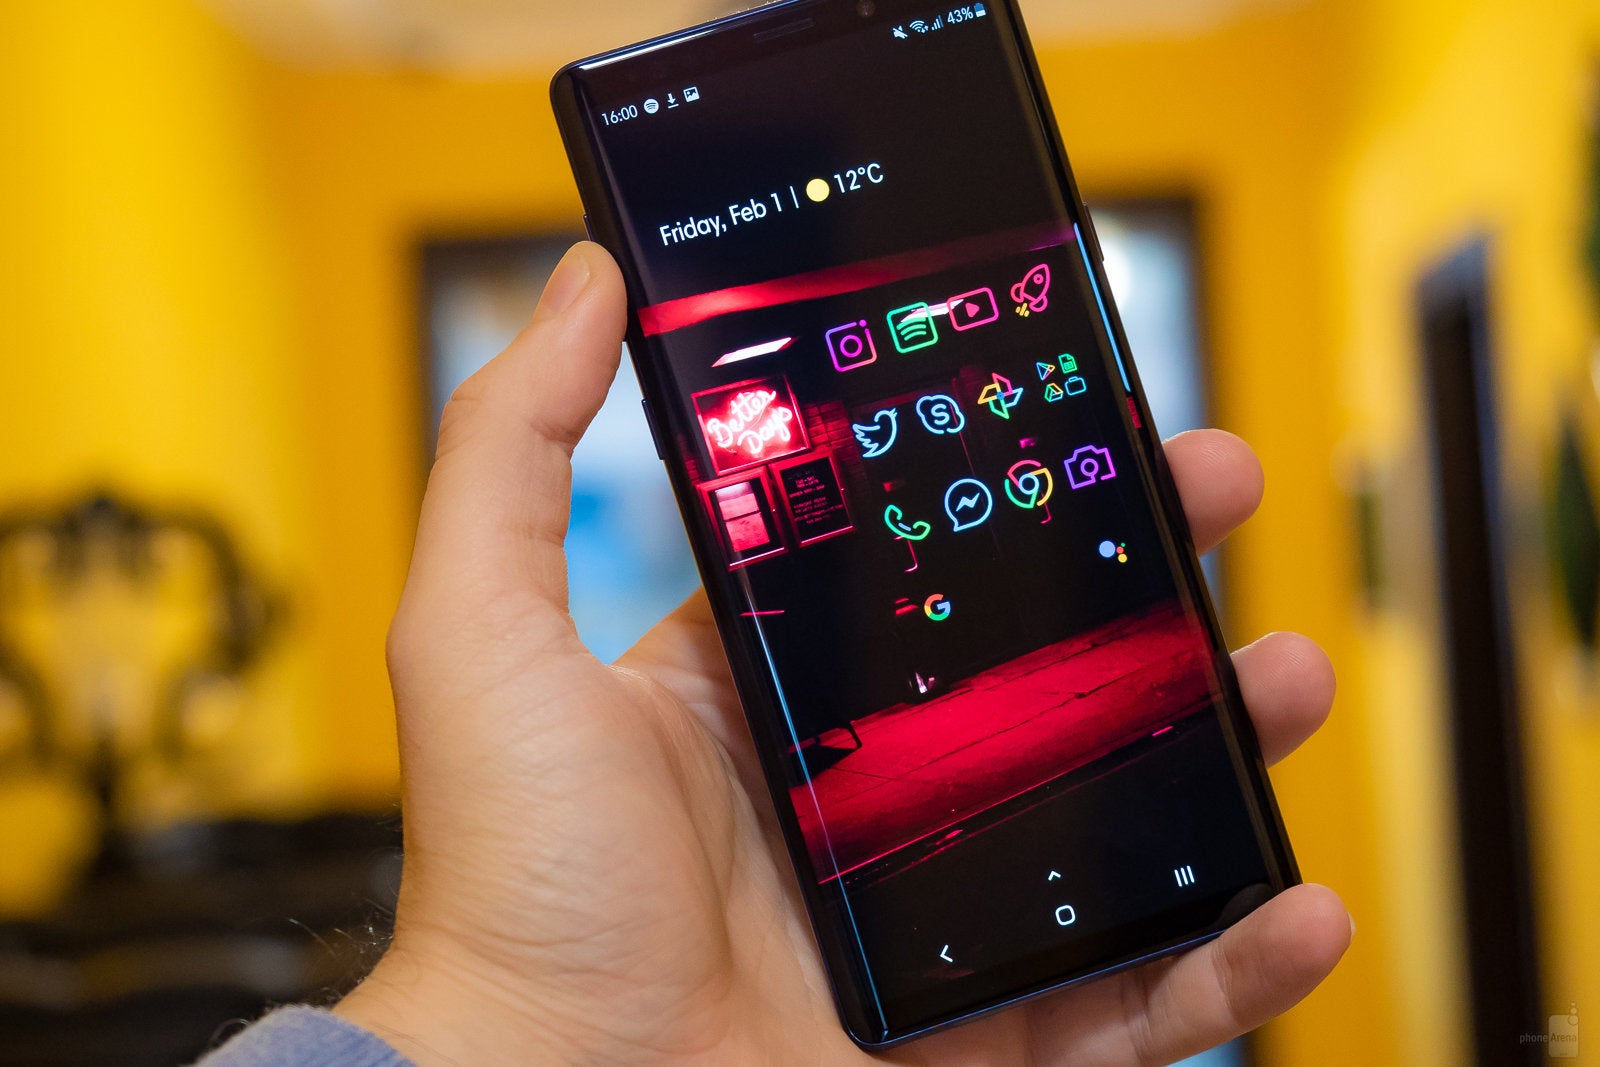 And this isn't even its final form yet - I used the Samsung Galaxy Note 9 for three months — here's what I loved and hated about it